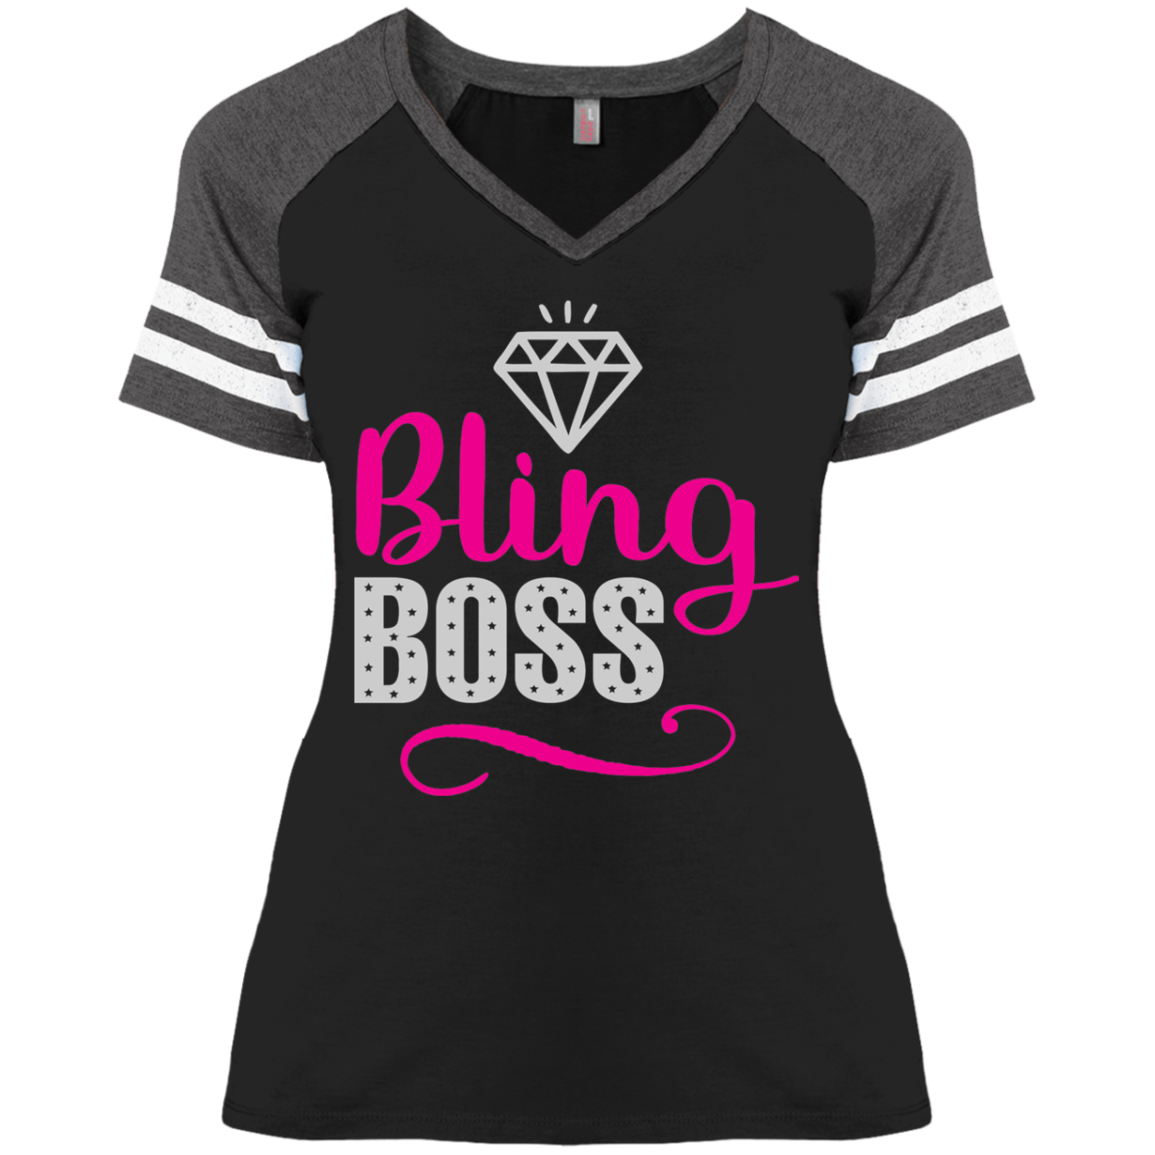 Bling Boss Tee Shirt With Stripes Sizes To 4XL – SodaGlitter